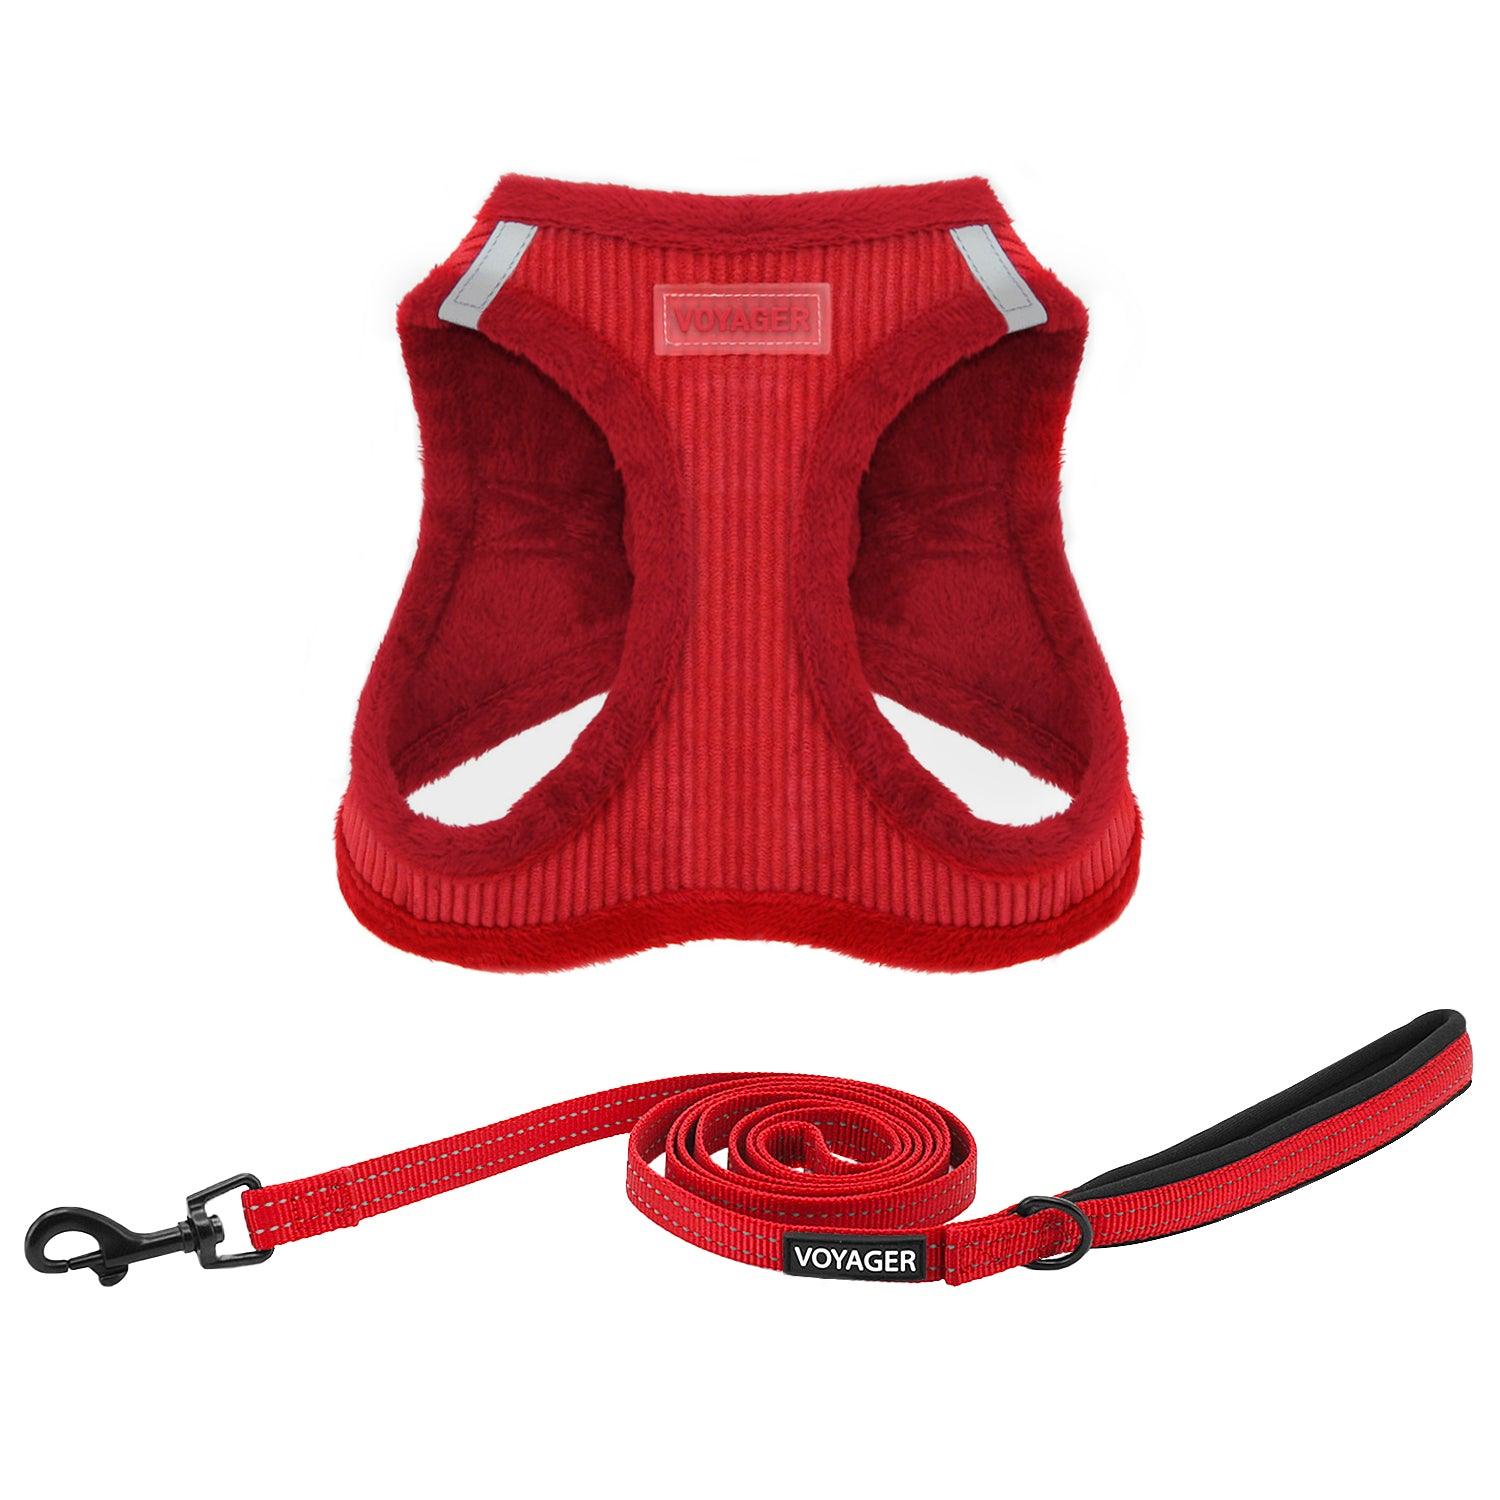 Step-In Plush Harness & Leash Combo Set - VOYAGER Dog Harnesses